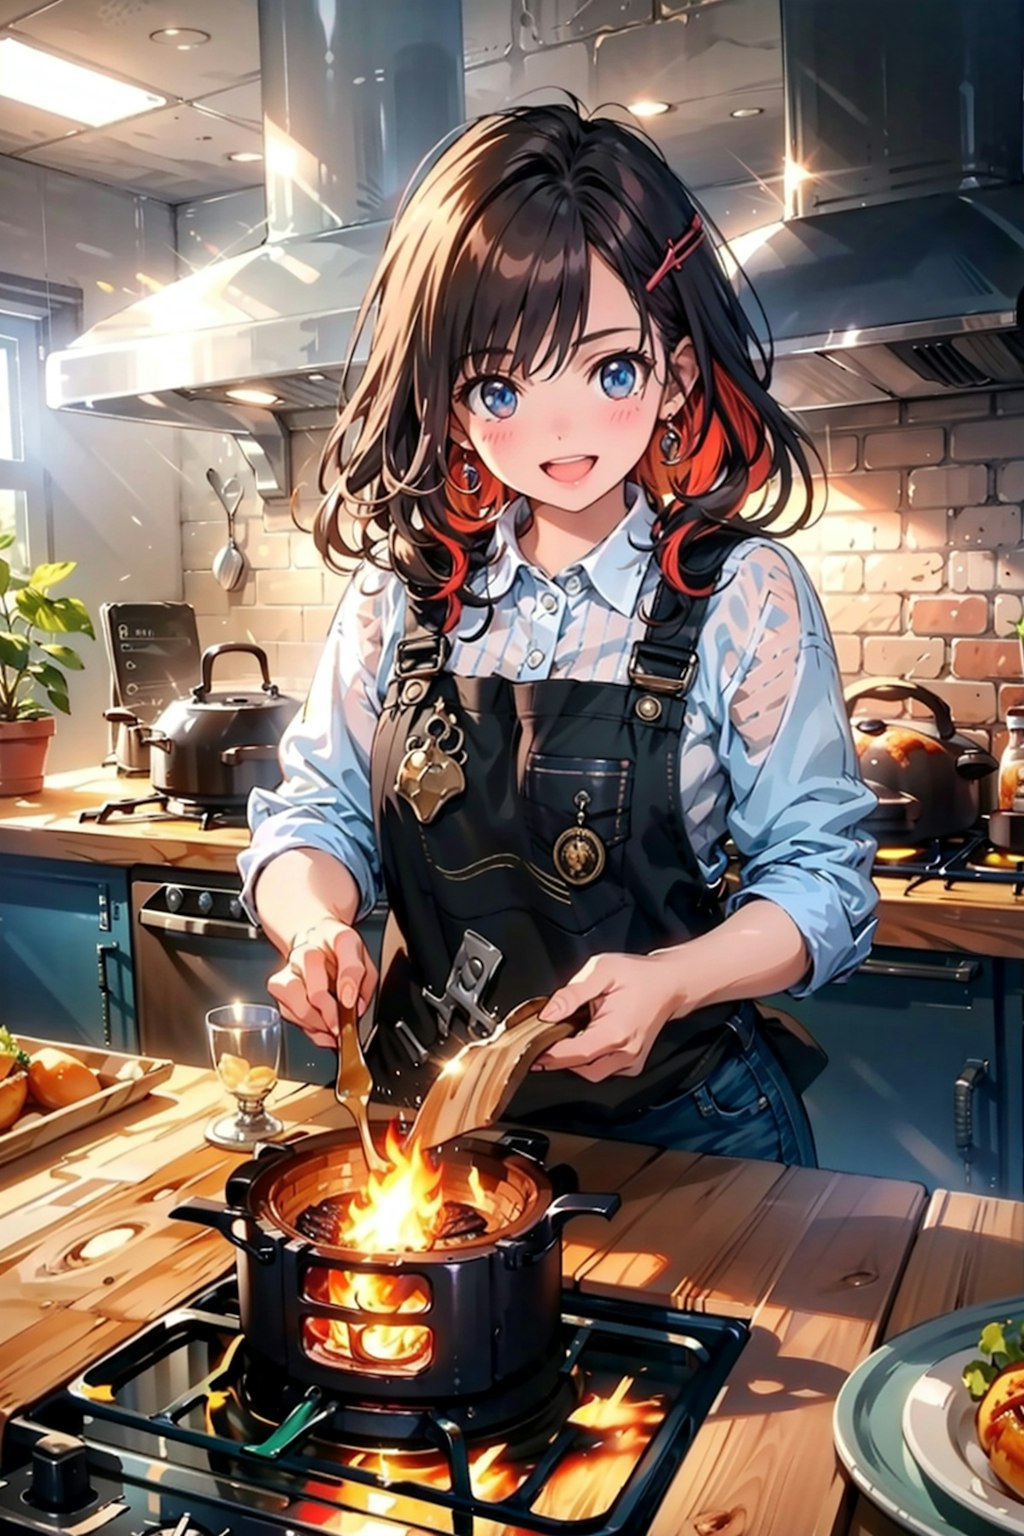 stove cooking